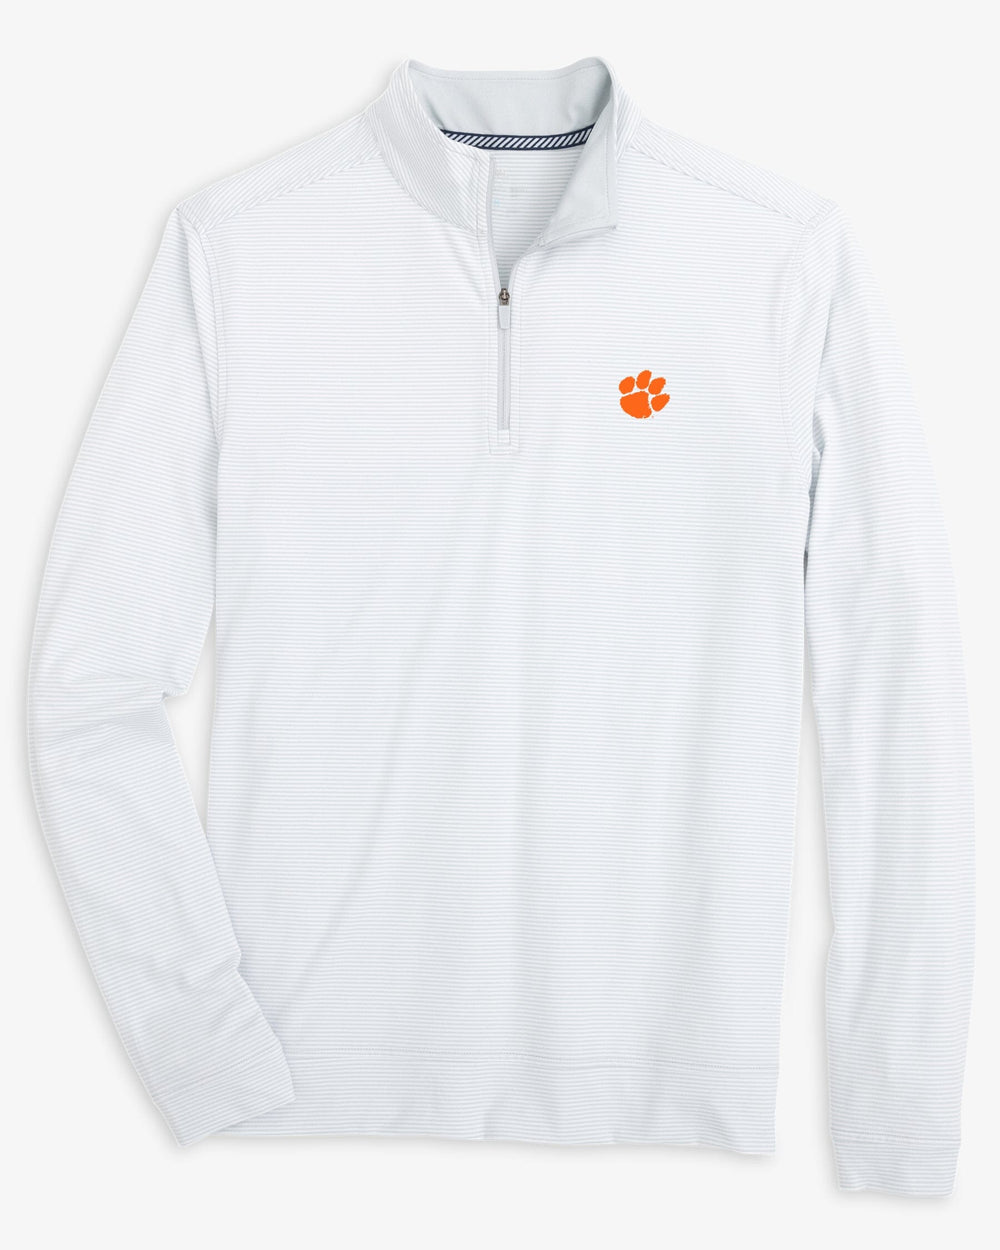 The front view of the Clemson Tigers Cruiser Micro-Stripe Heather Quarter Zip by Southern Tide - Heather Slate Grey